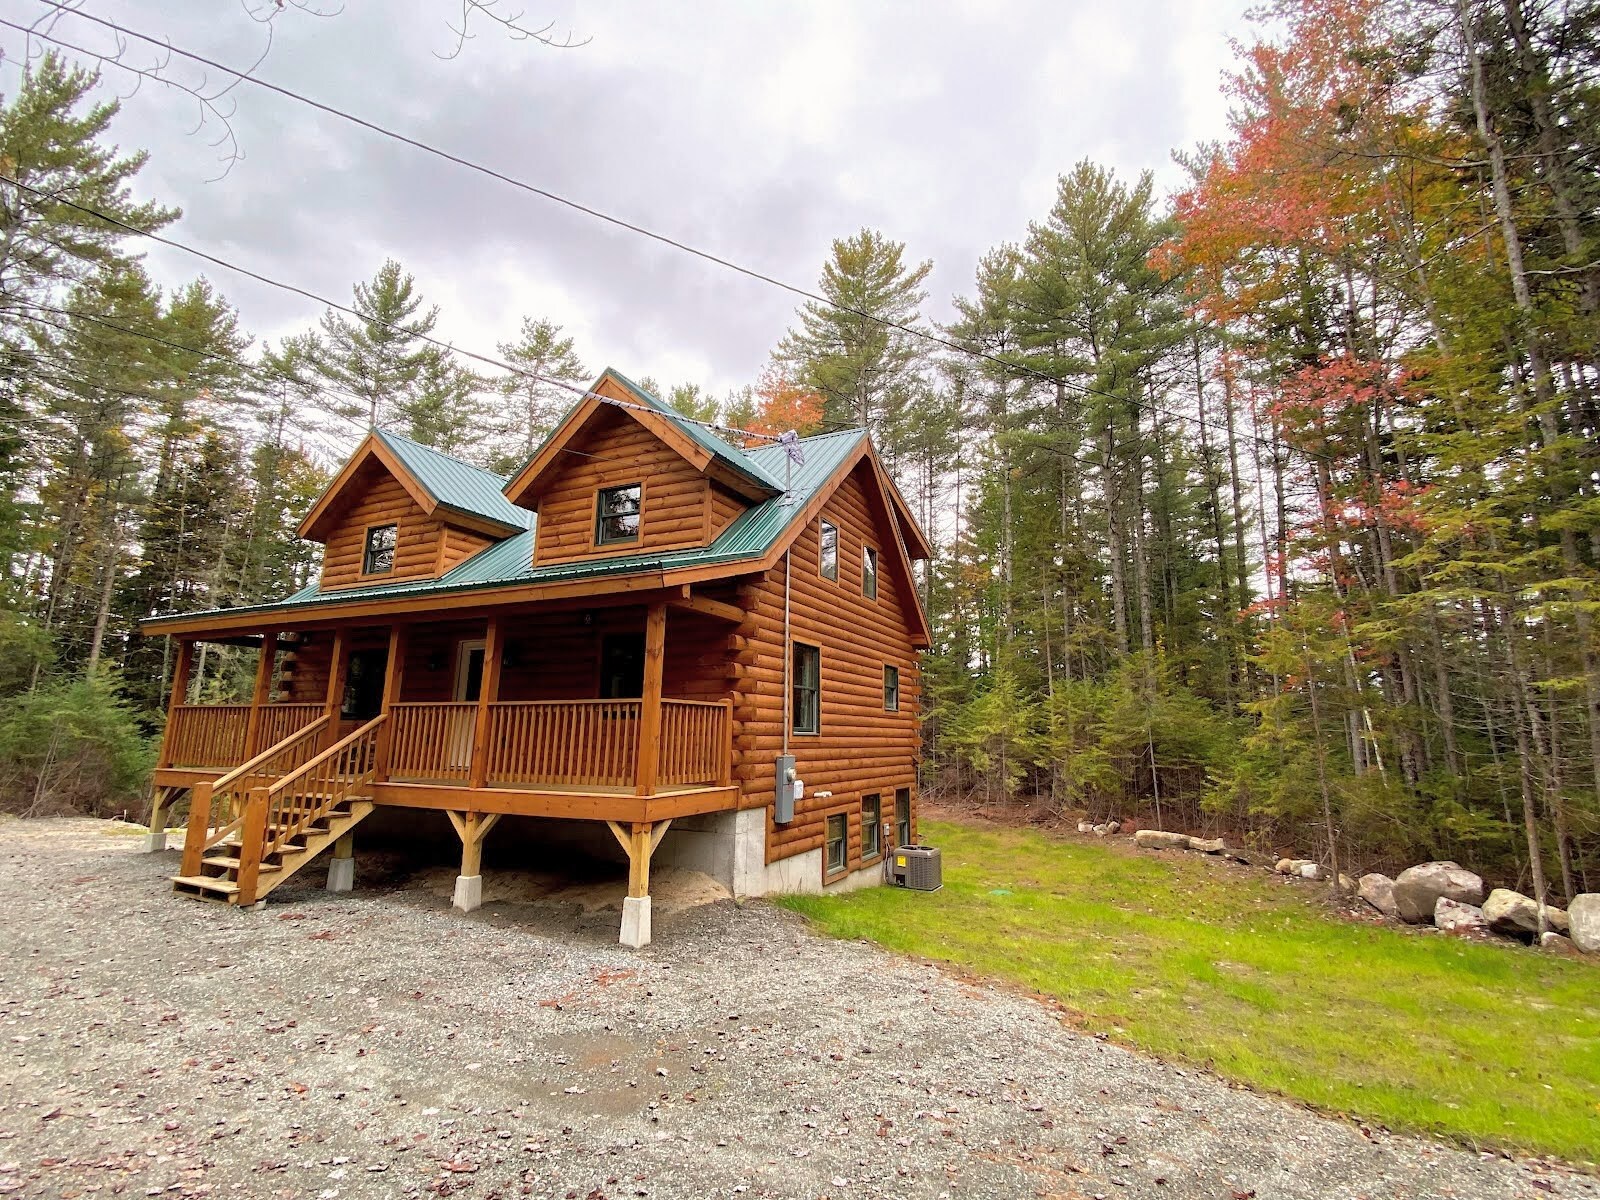 This beautiful log home, 80PVR, marries the classic coziness of log homes with modern comforts.